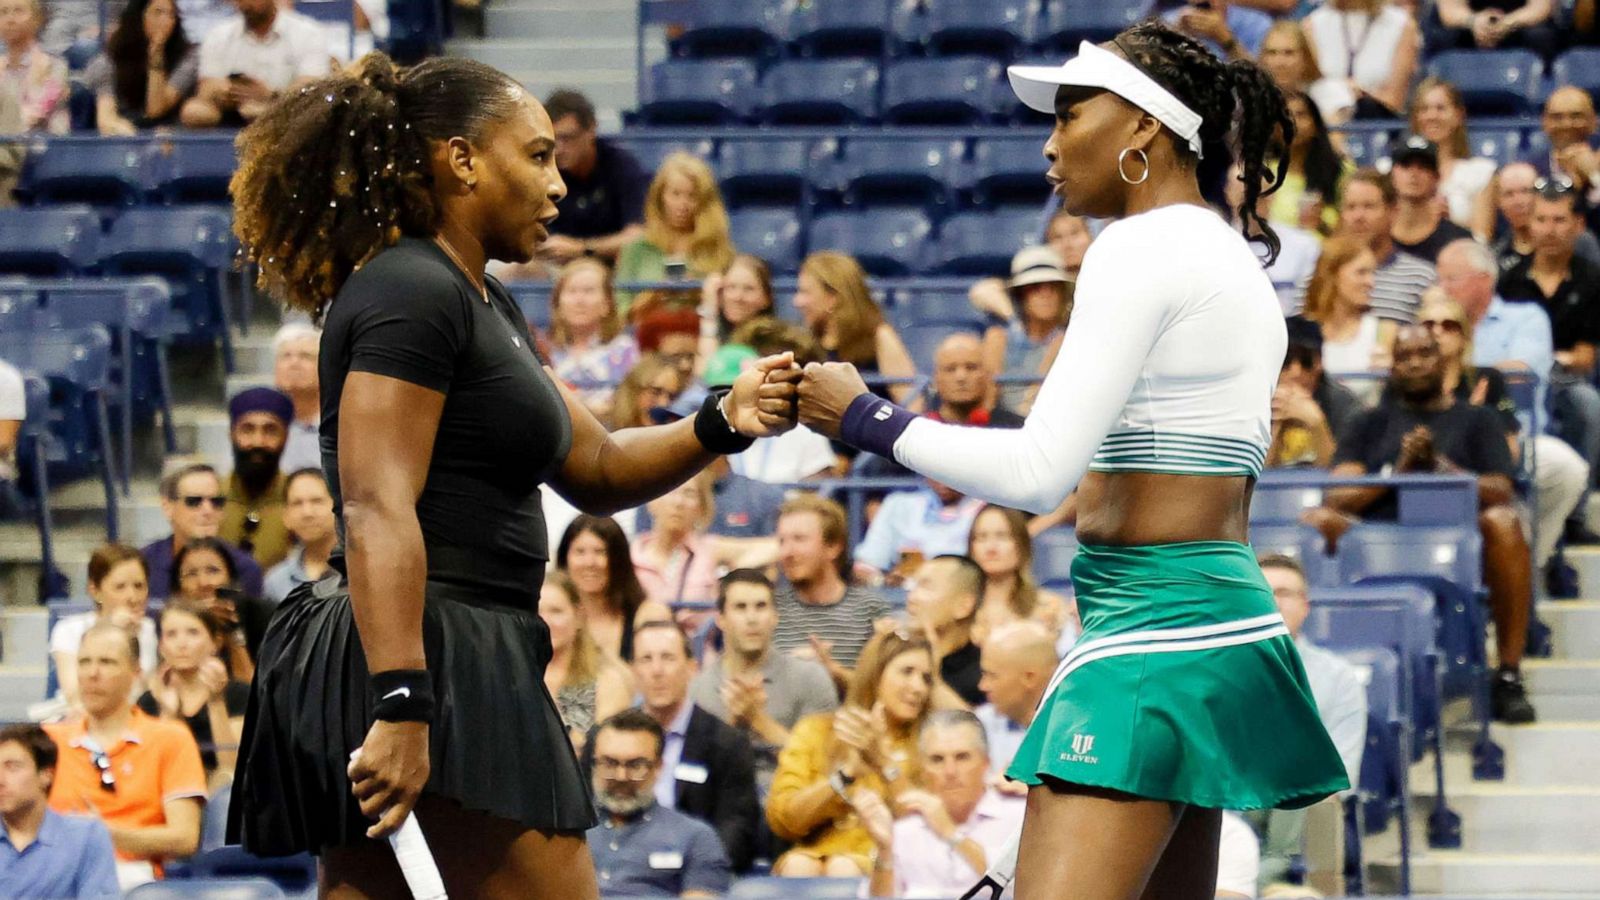 Serena Williams, Venus Williams walk off court in likely last doubles match together